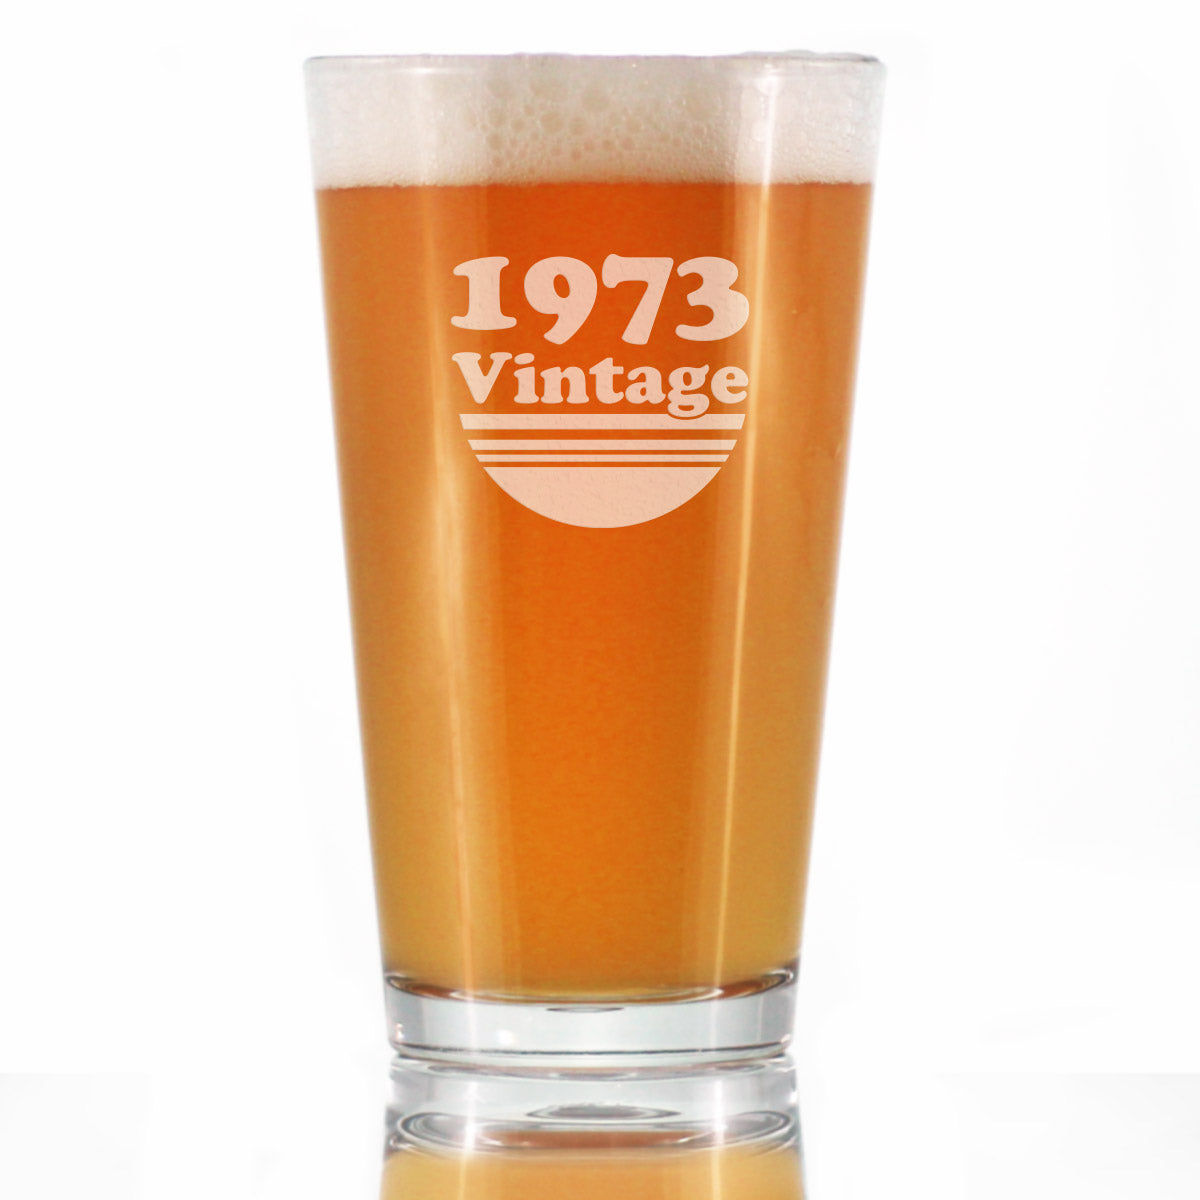 Vintage 1973 - Pint Glass for Beer - 50th Birthday Gifts for Men or Women Turning 50 - Fun Bday Party Decor - 16 oz